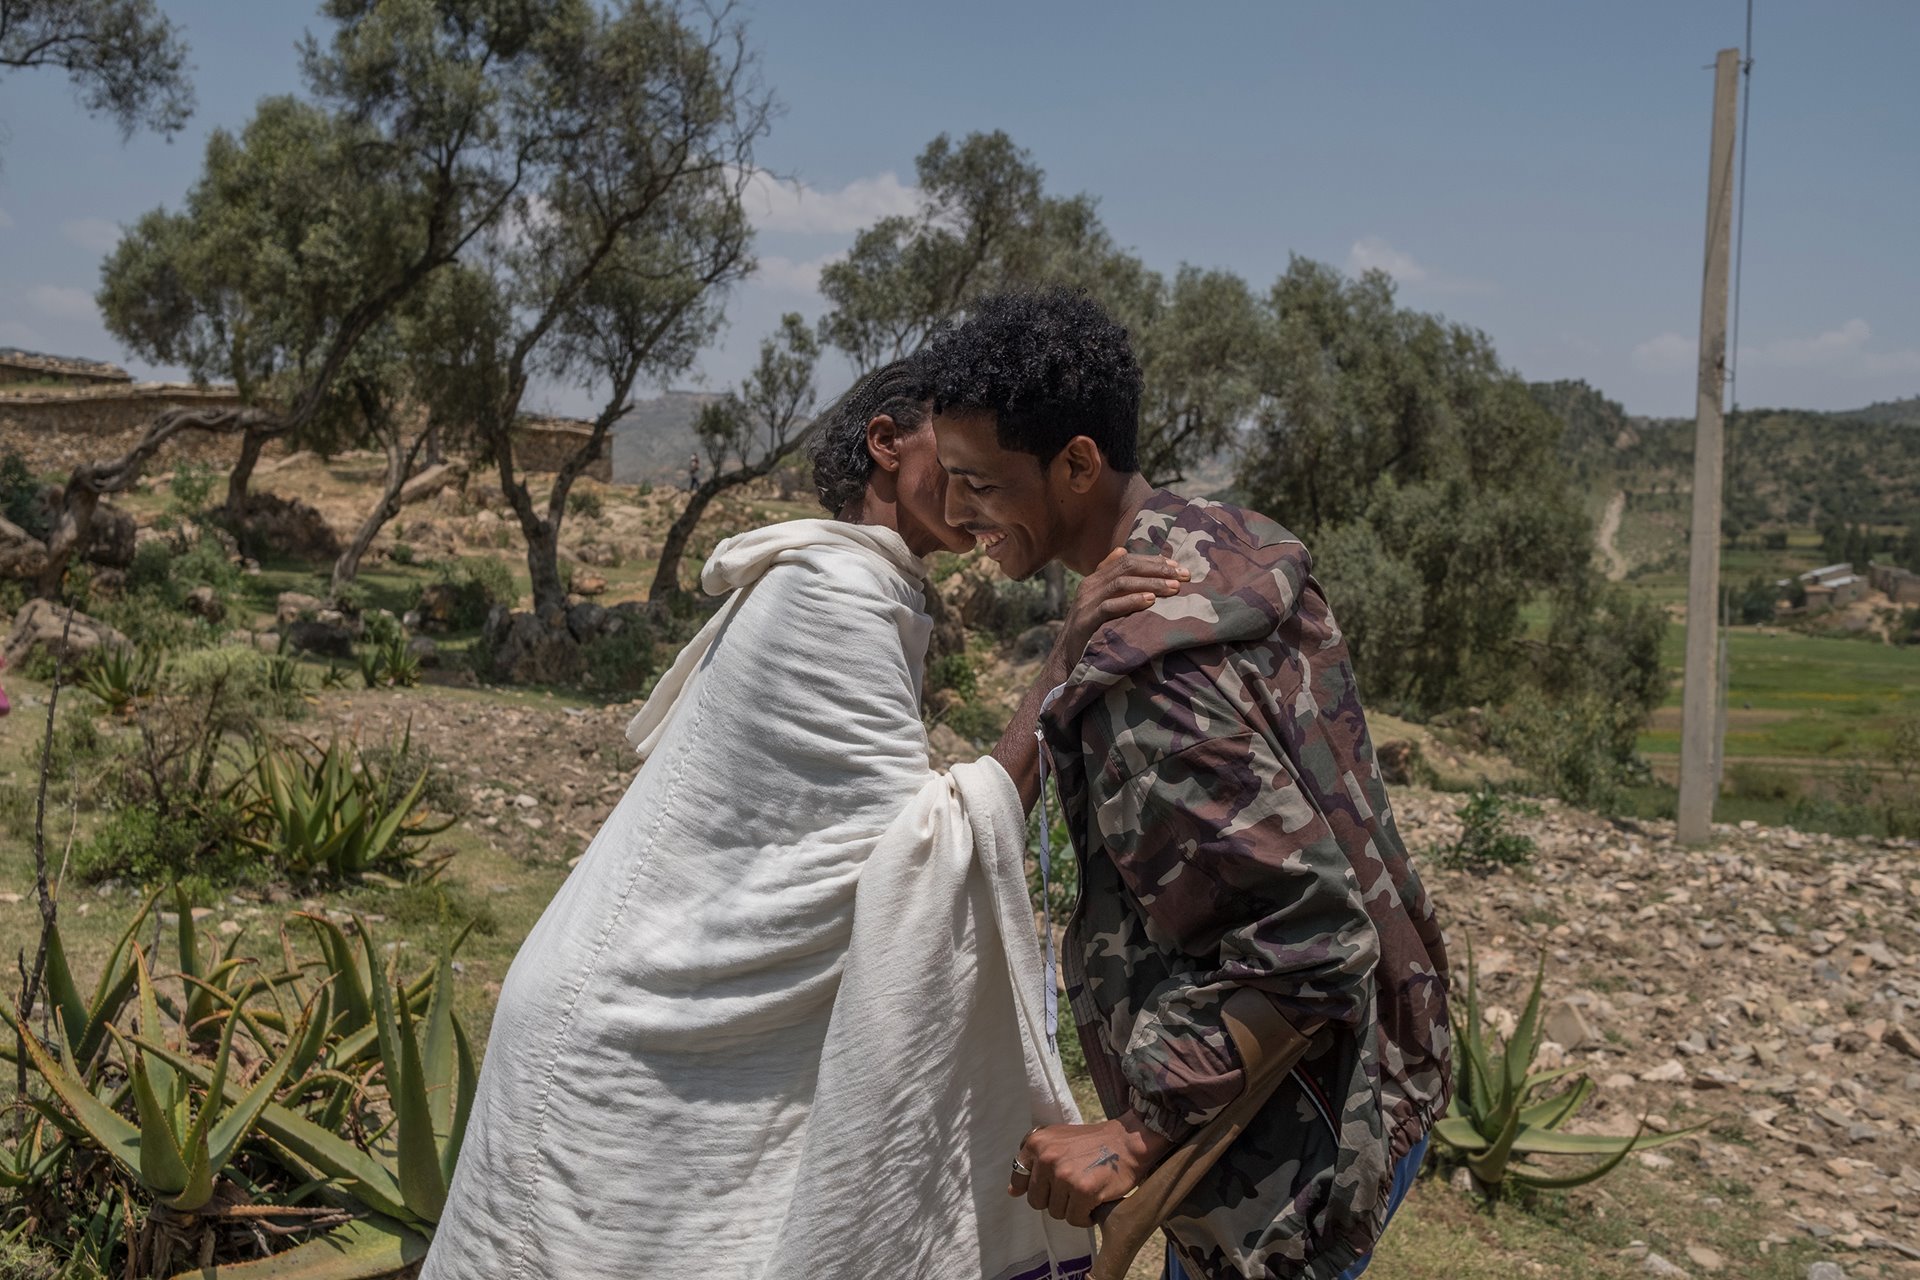 Kibrom Berhane (24) greets his mother for the first time since he joined the Tigray Defense Forces, two years earlier. Saesie Tsada, Ethiopia.